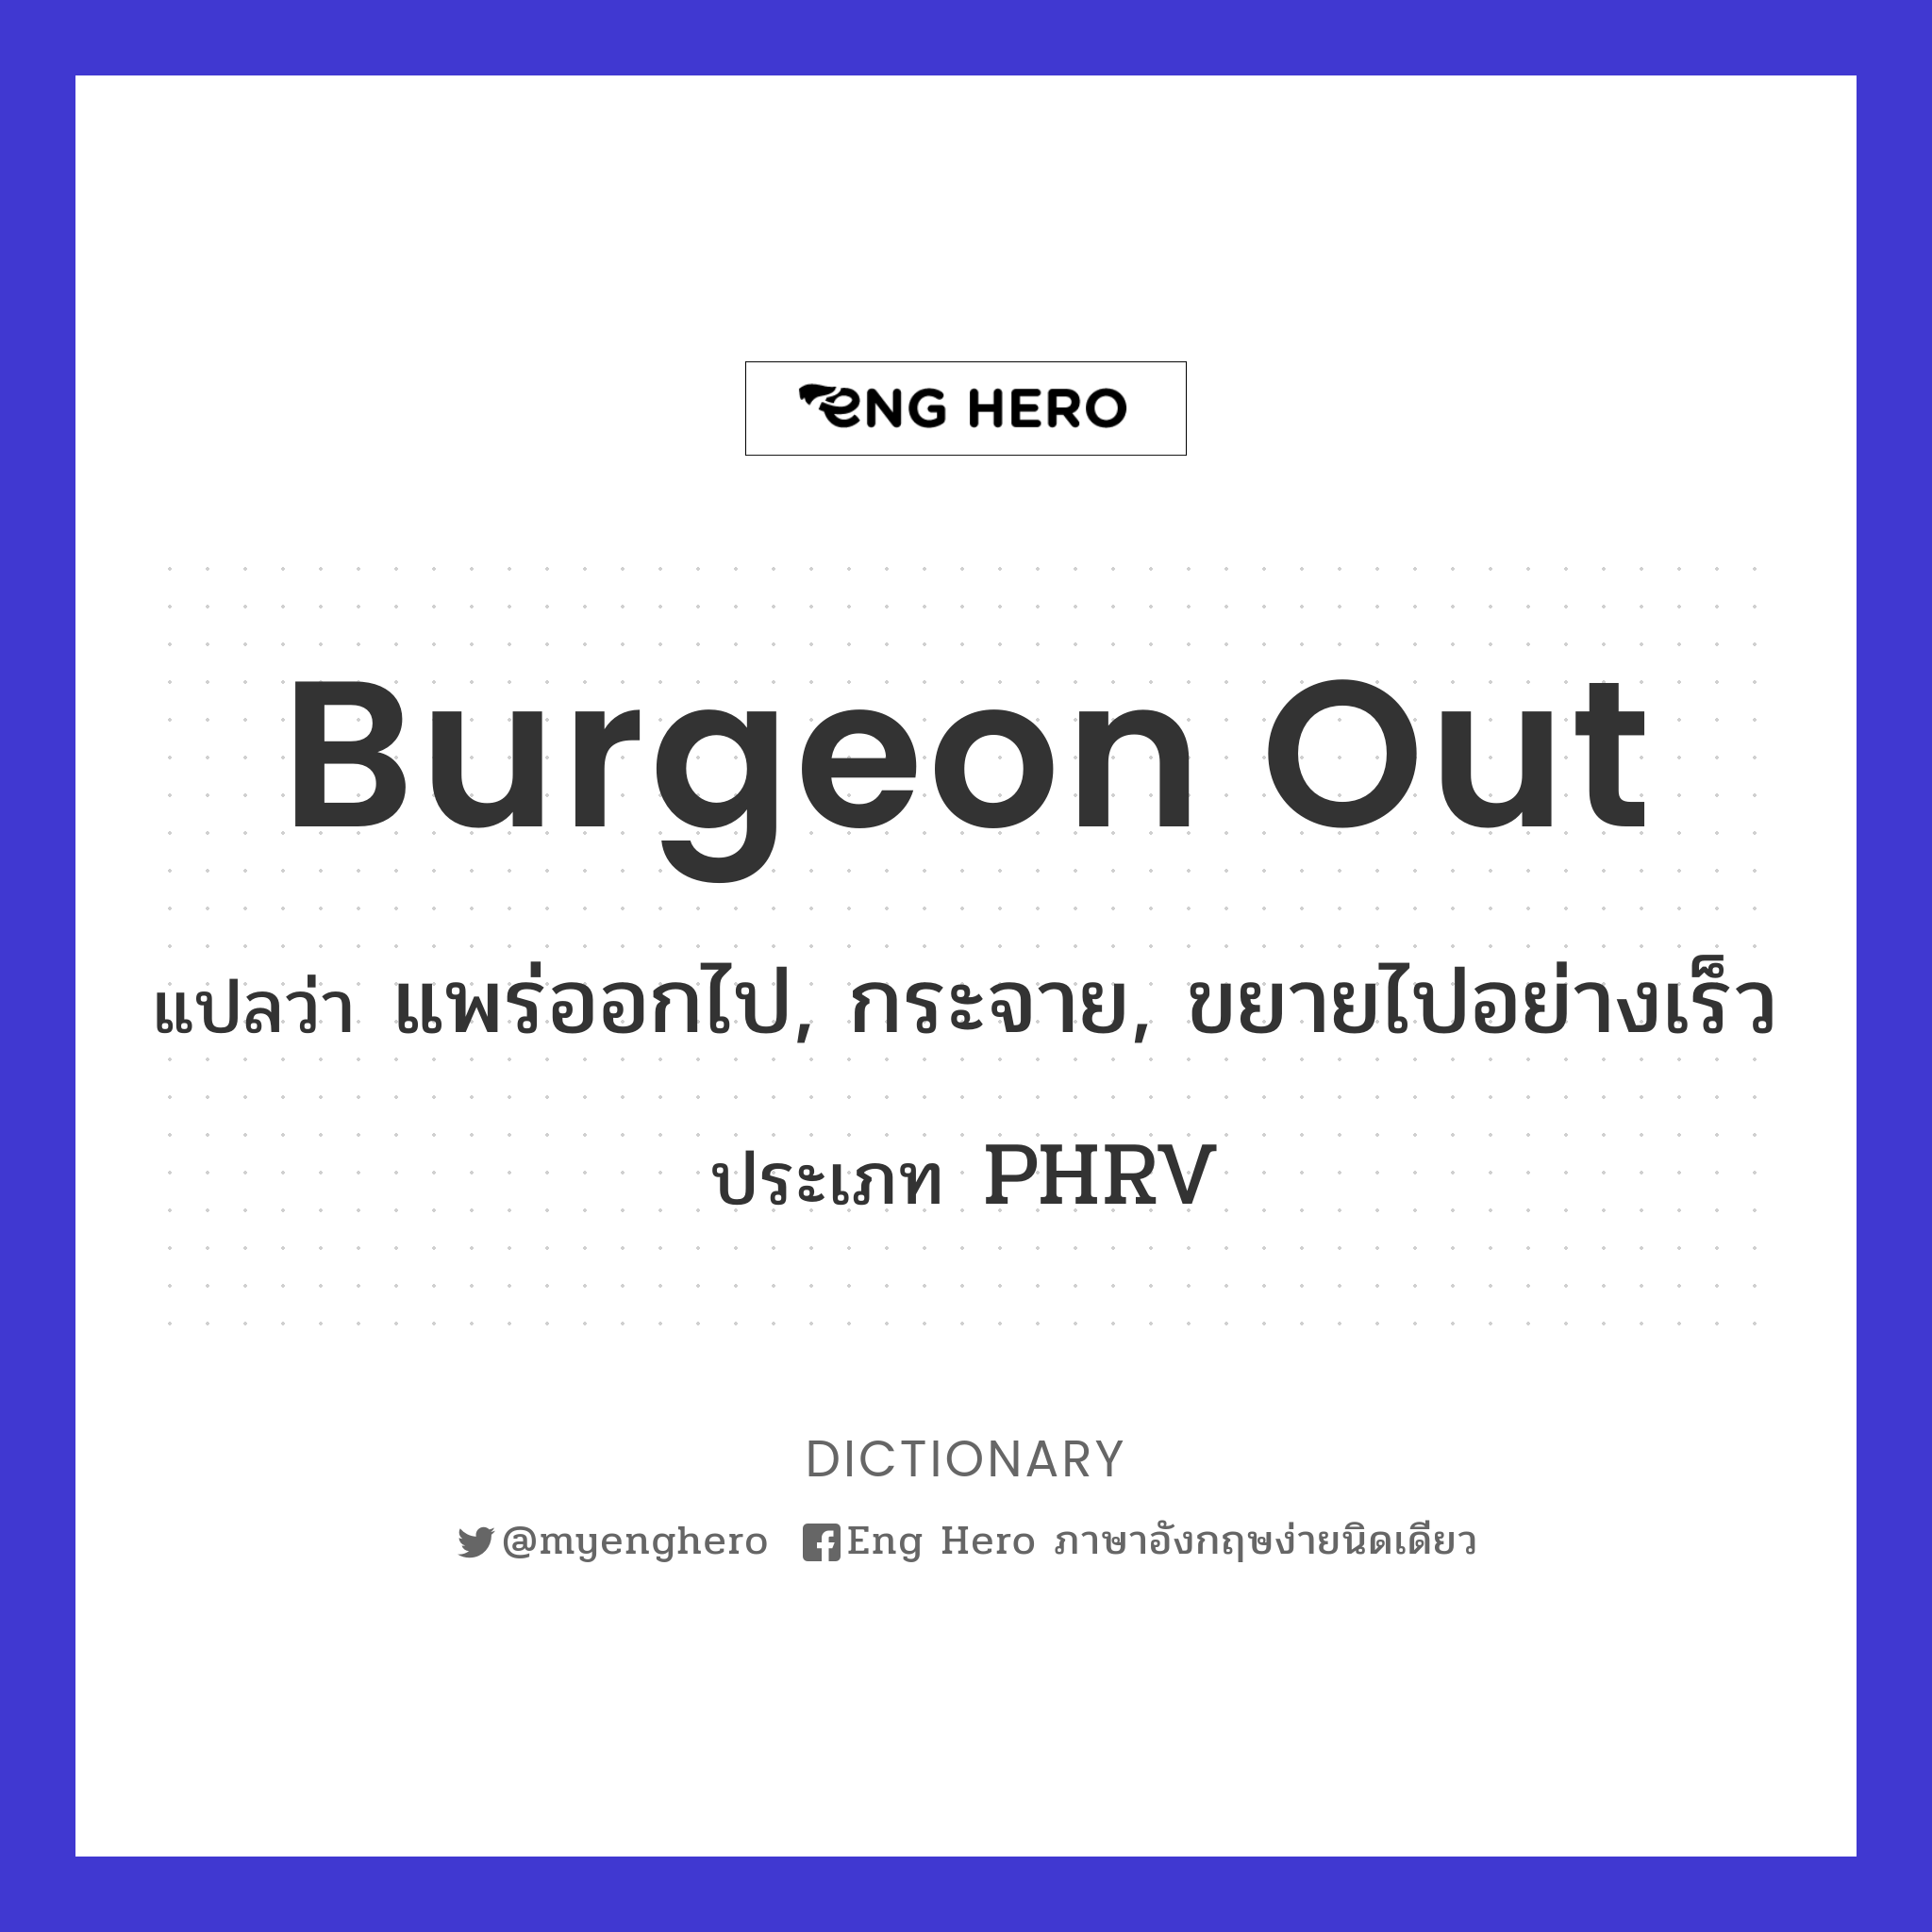 burgeon out